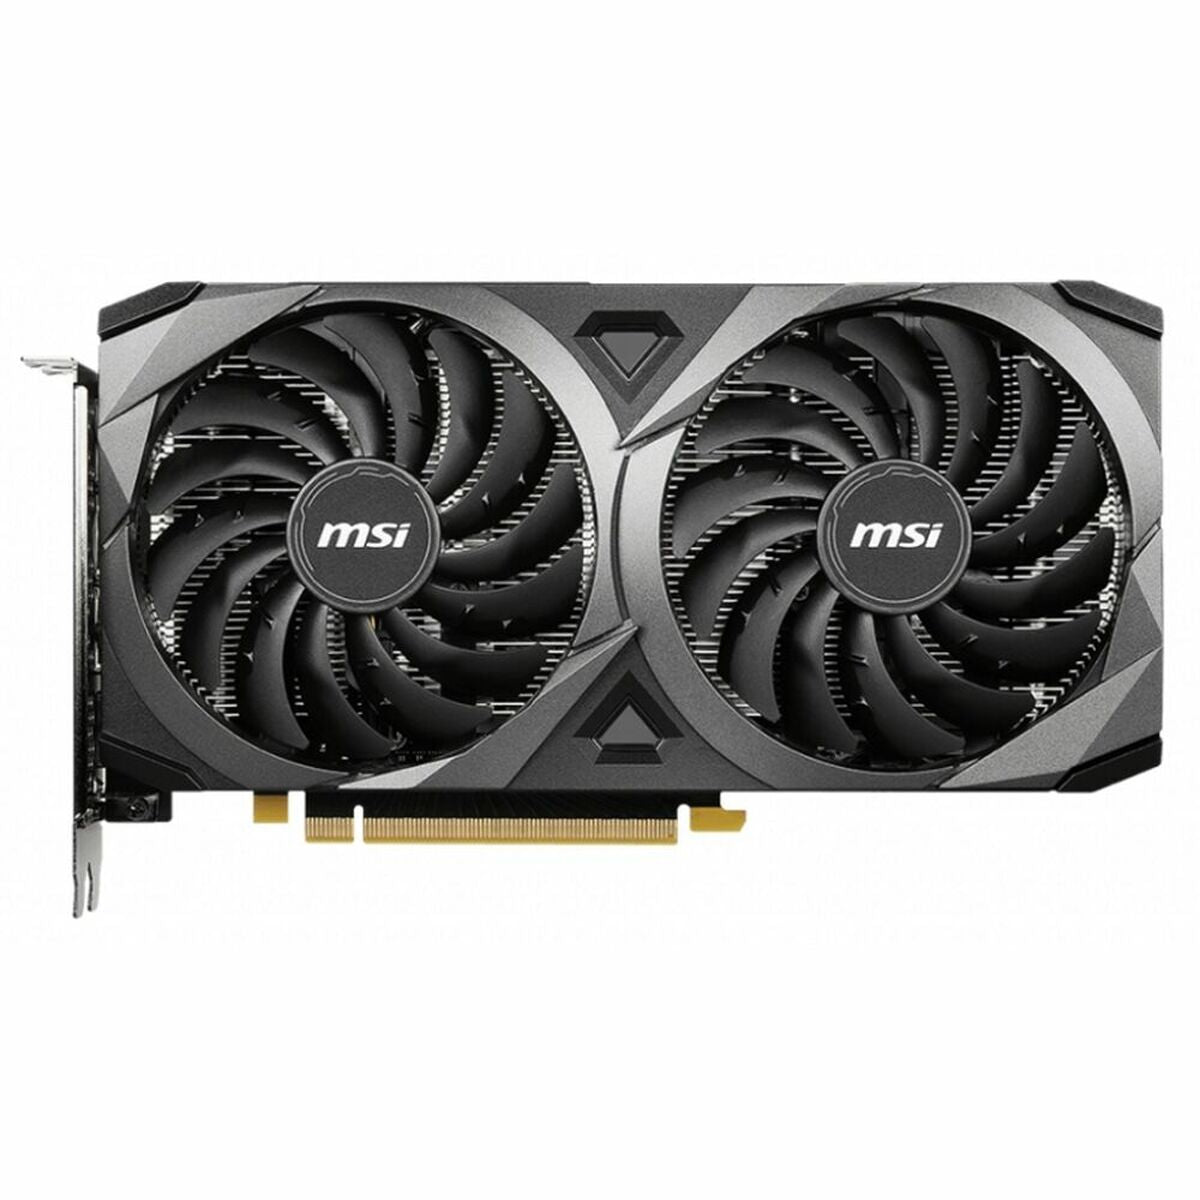 Graphics card MSI 912-V397-039 GeForce RTX 3060 12 GB GDDR6, MSI, Computing, Components, graphics-card-msi-geforce-rtx-3060-ventus-2x-12g-oc, Brand_MSI, category-reference-2609, category-reference-2803, category-reference-2812, category-reference-t-19685, category-reference-t-19912, category-reference-t-21360, computers / components, Condition_NEW, Price_300 - 400, RiotNook